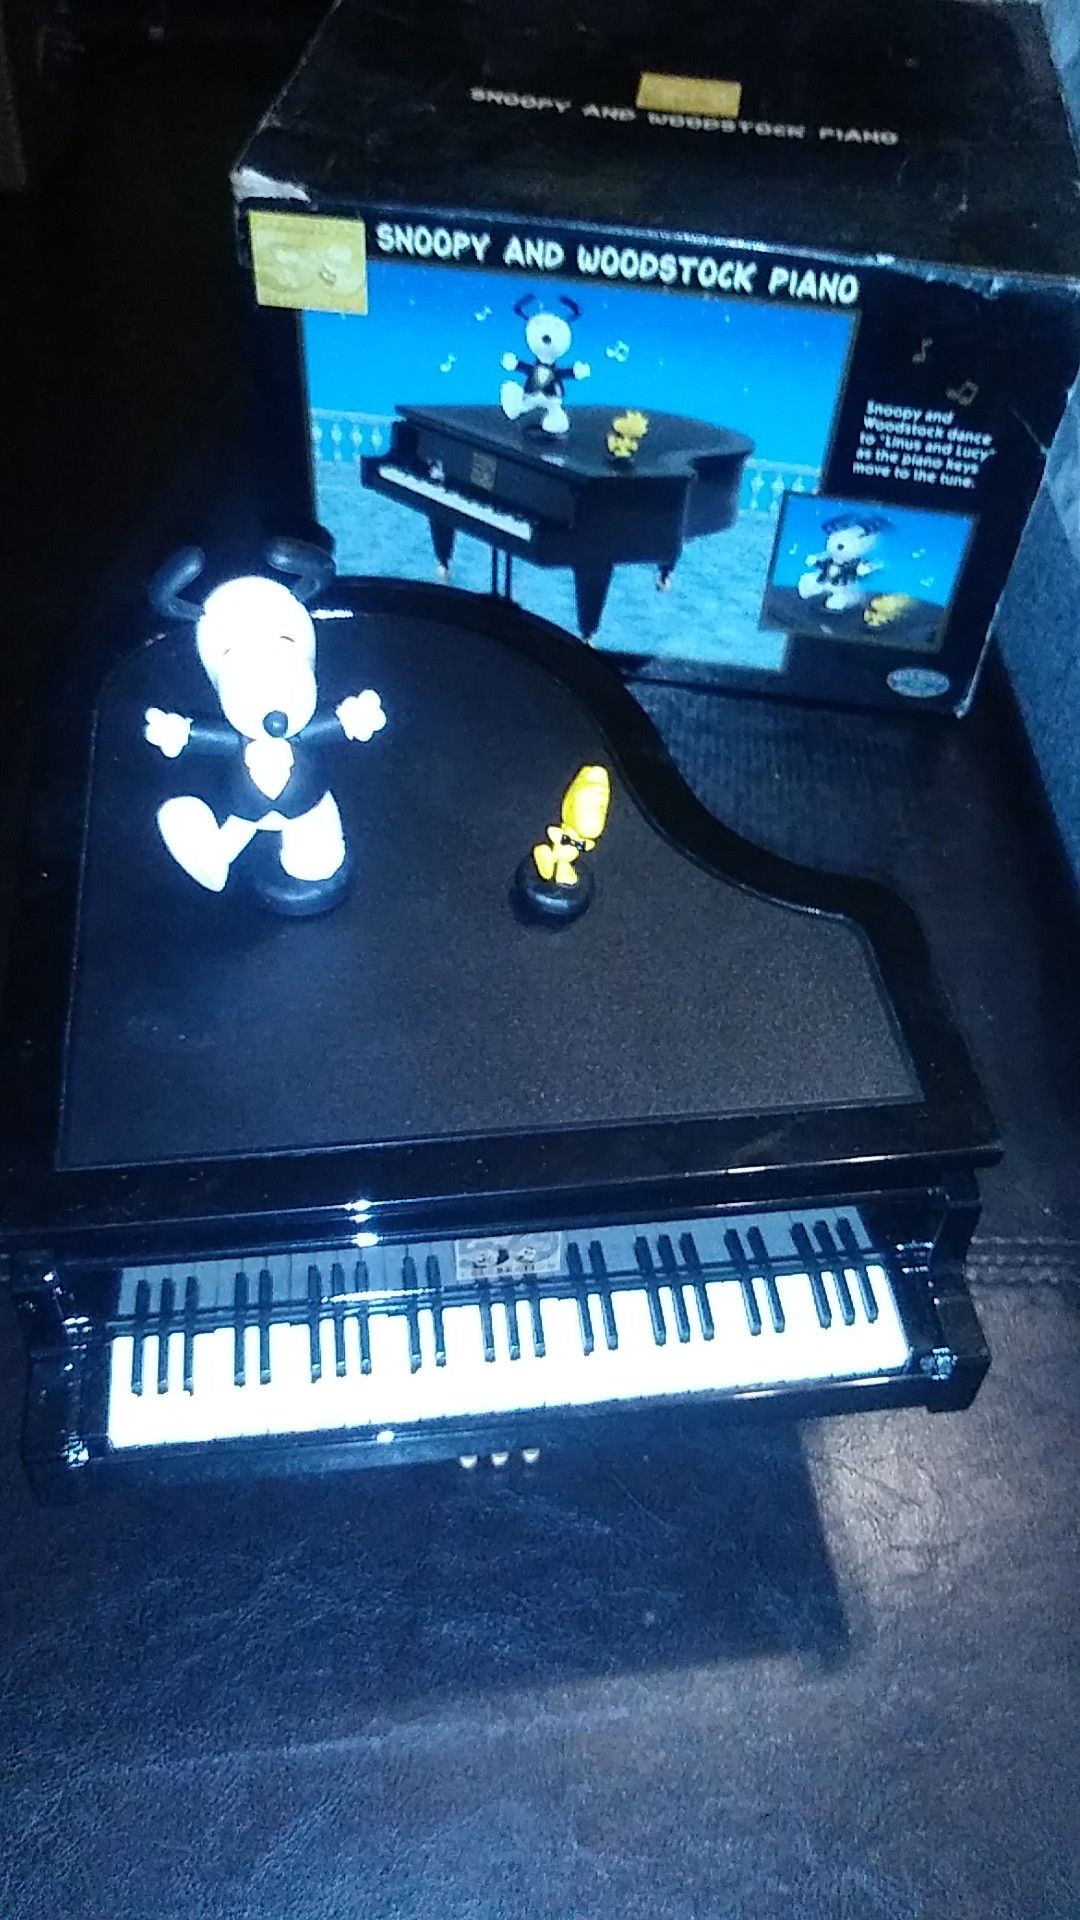 Musical SNOOPY piano $15